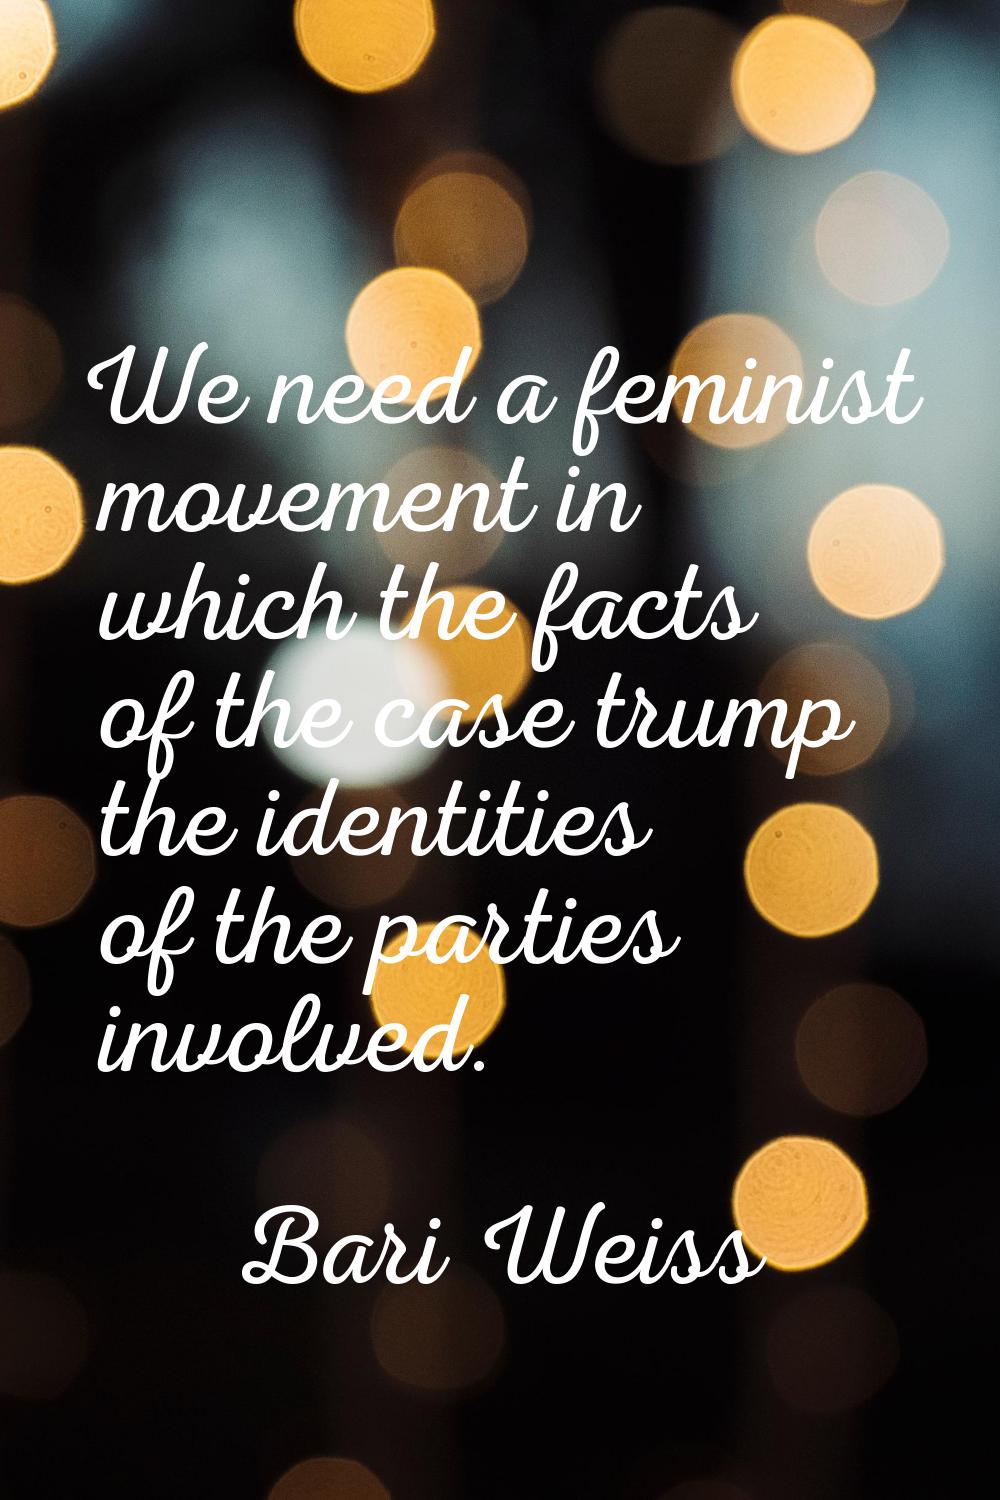 We need a feminist movement in which the facts of the case trump the identities of the parties invo